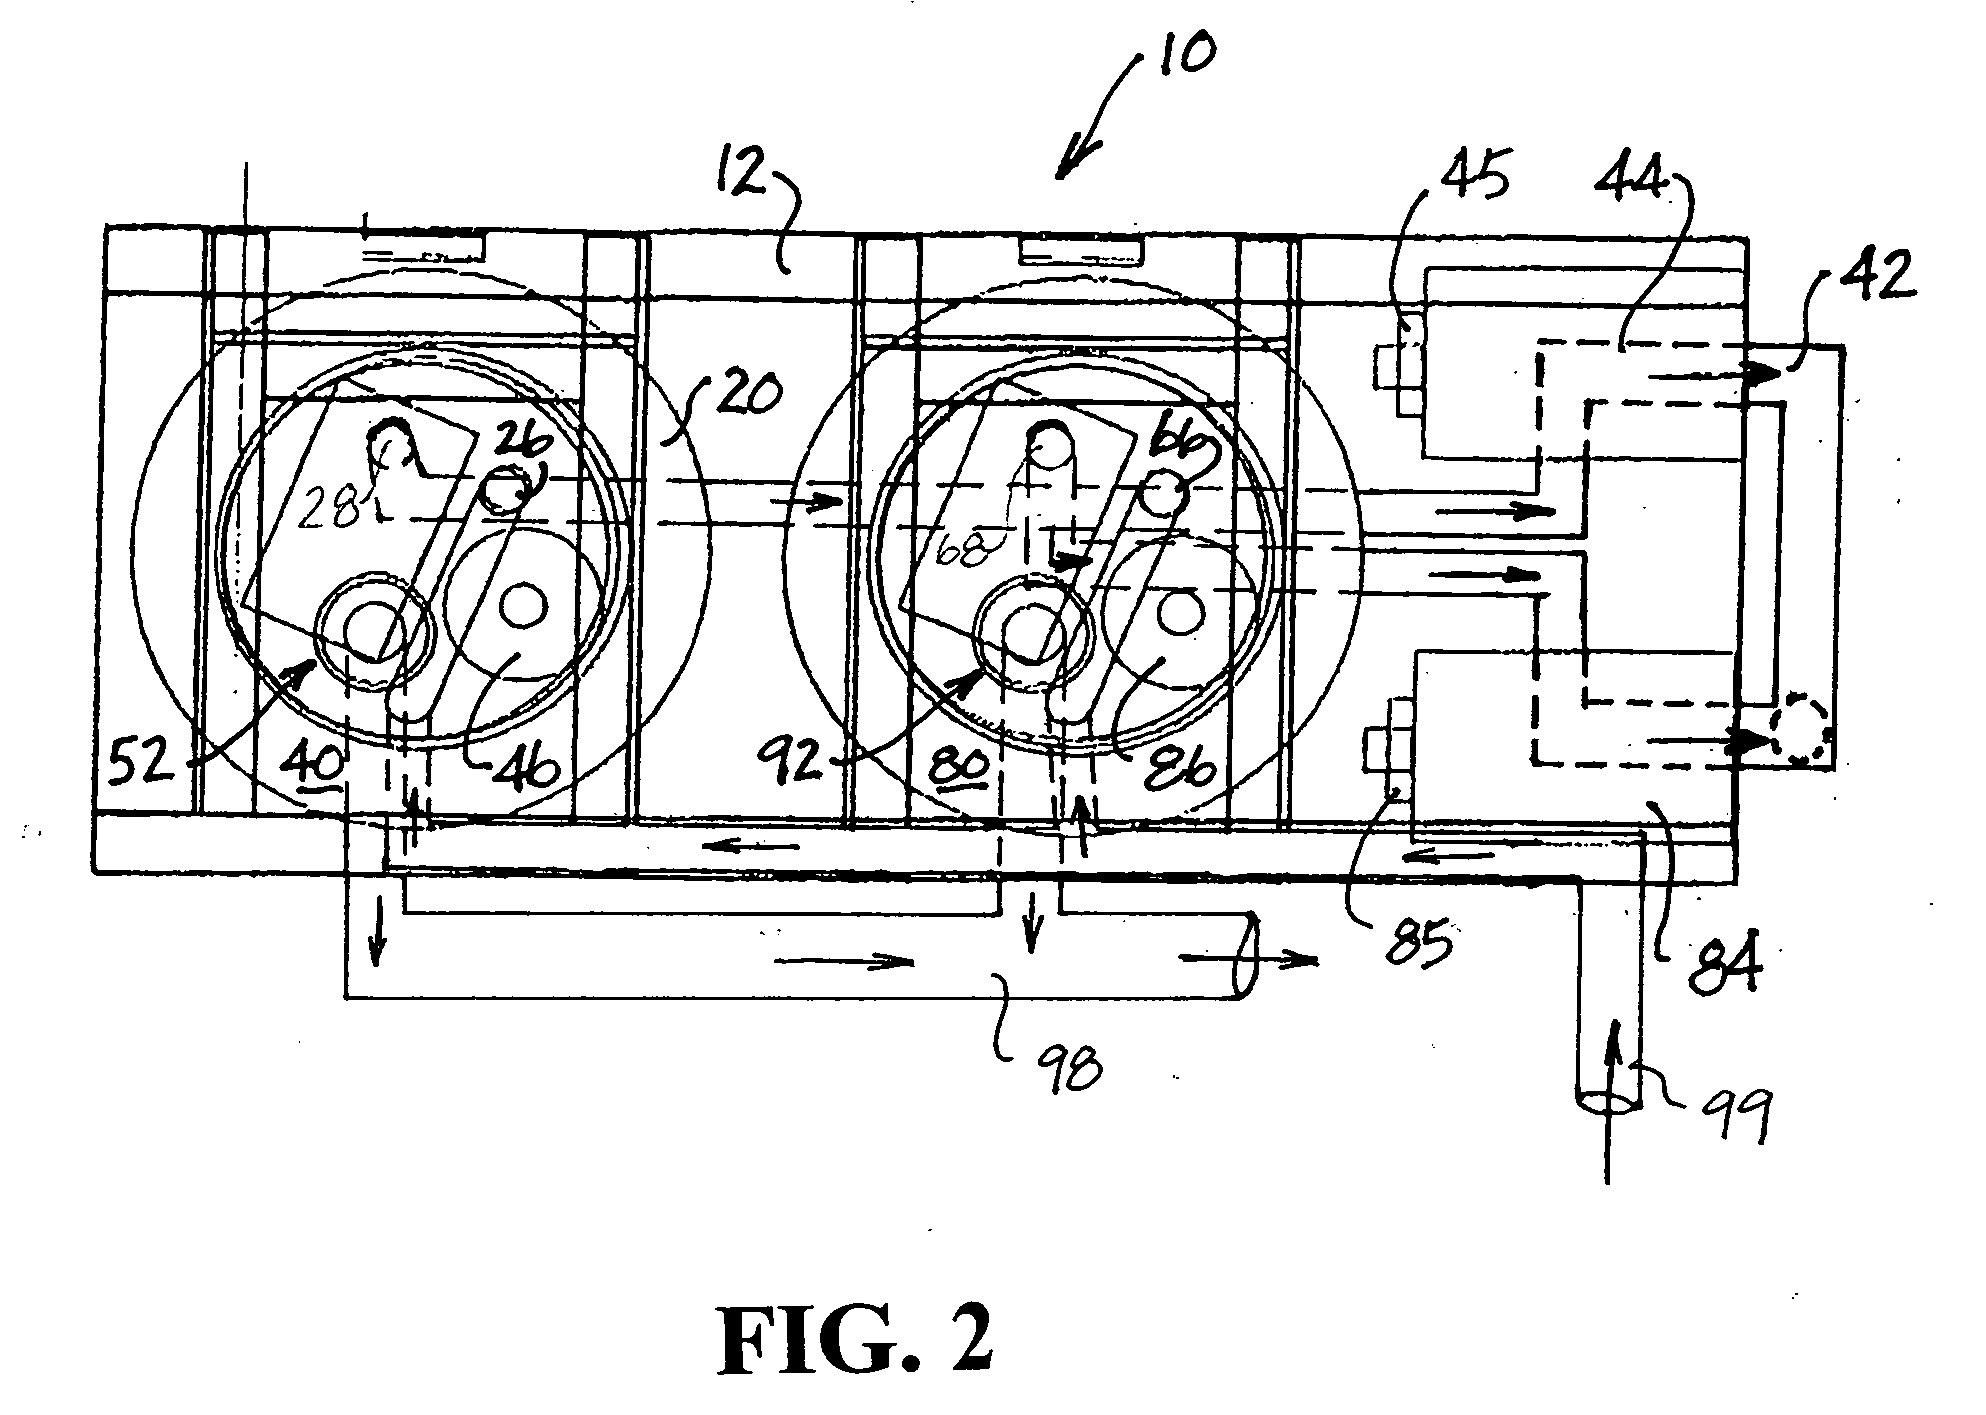 Apparatus for continuously aspirating a fluid from a fluid source